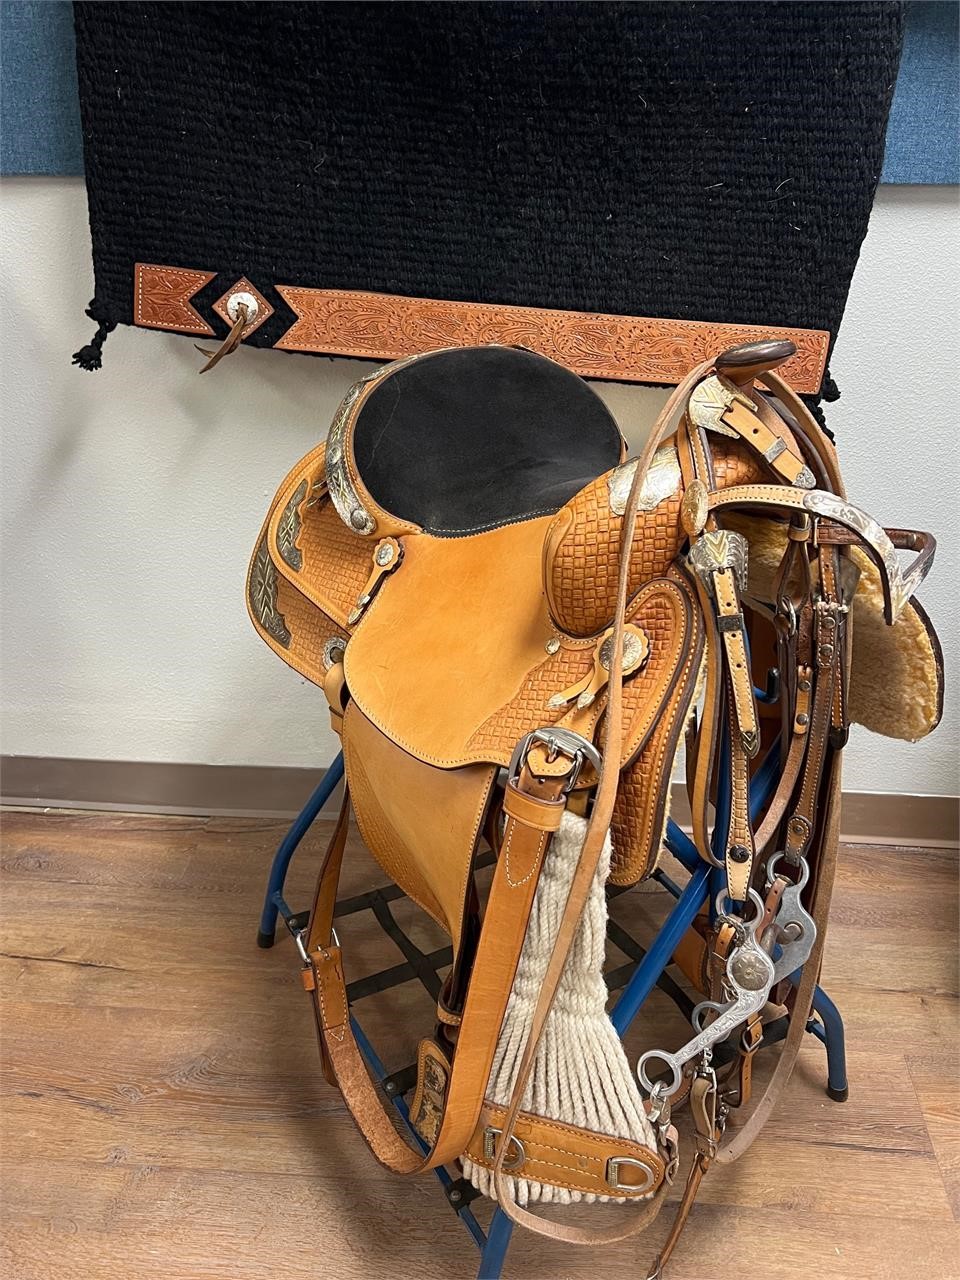 Bighorn show saddle, blanket and bridle